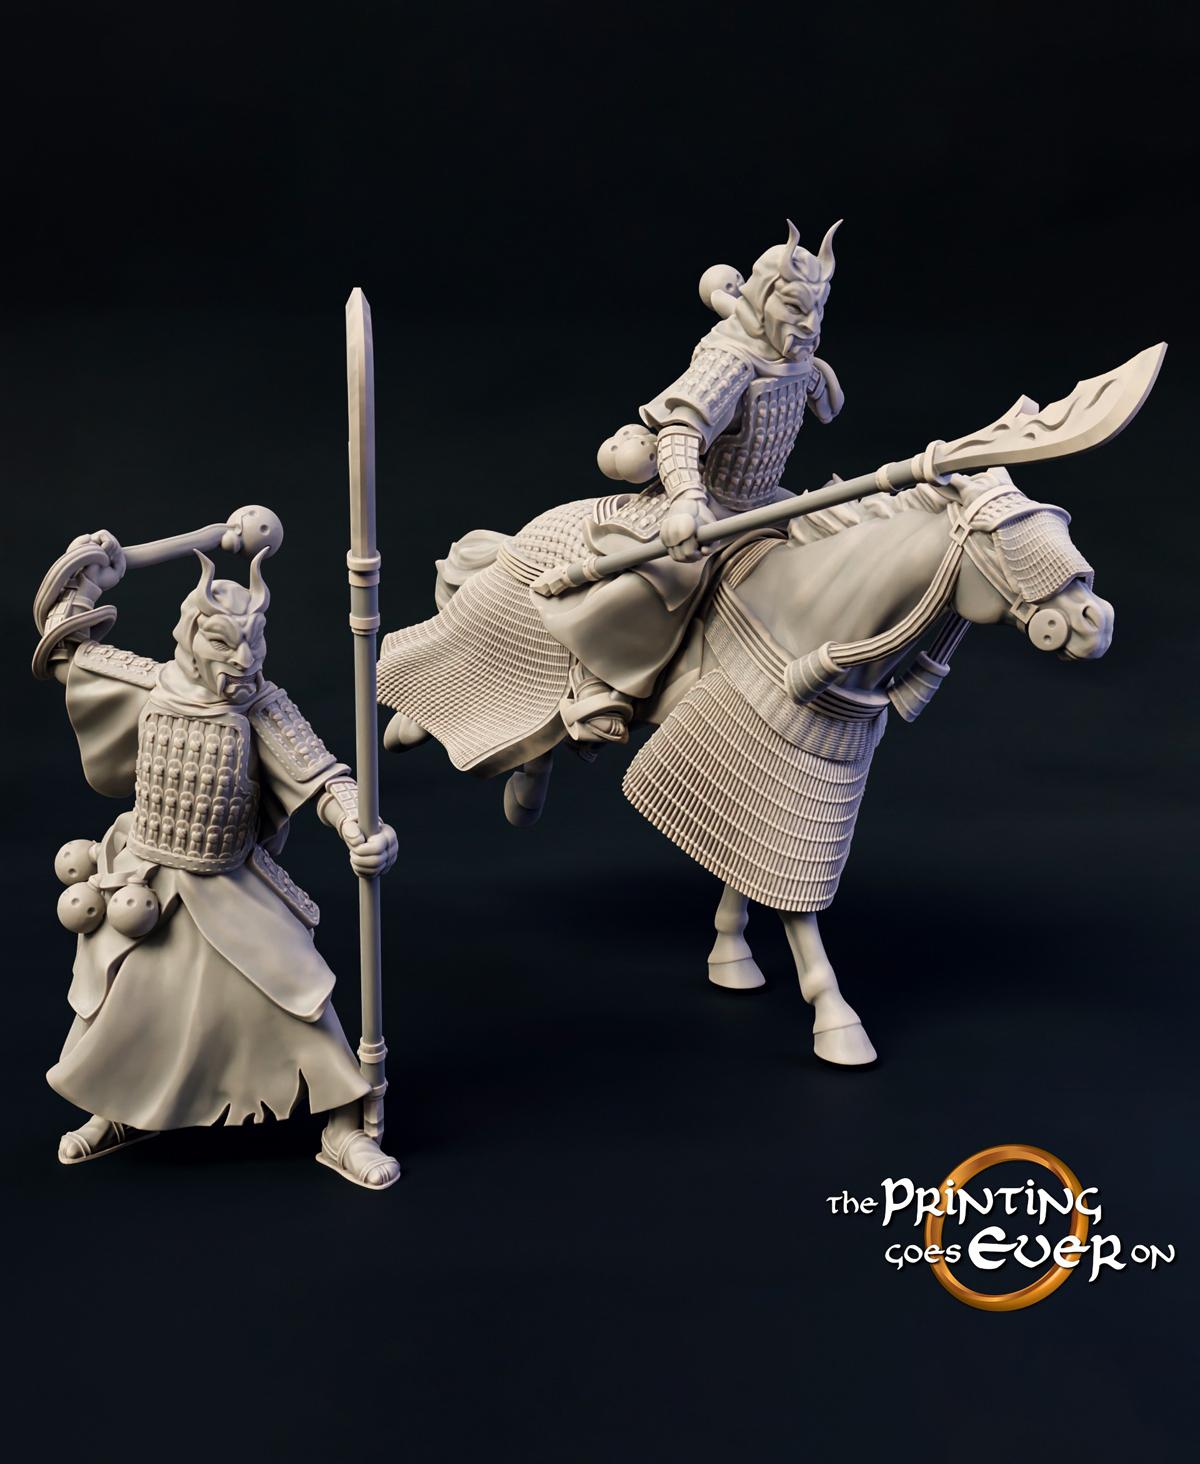 Dark Alchemist - On Foot and Mounted 3d model